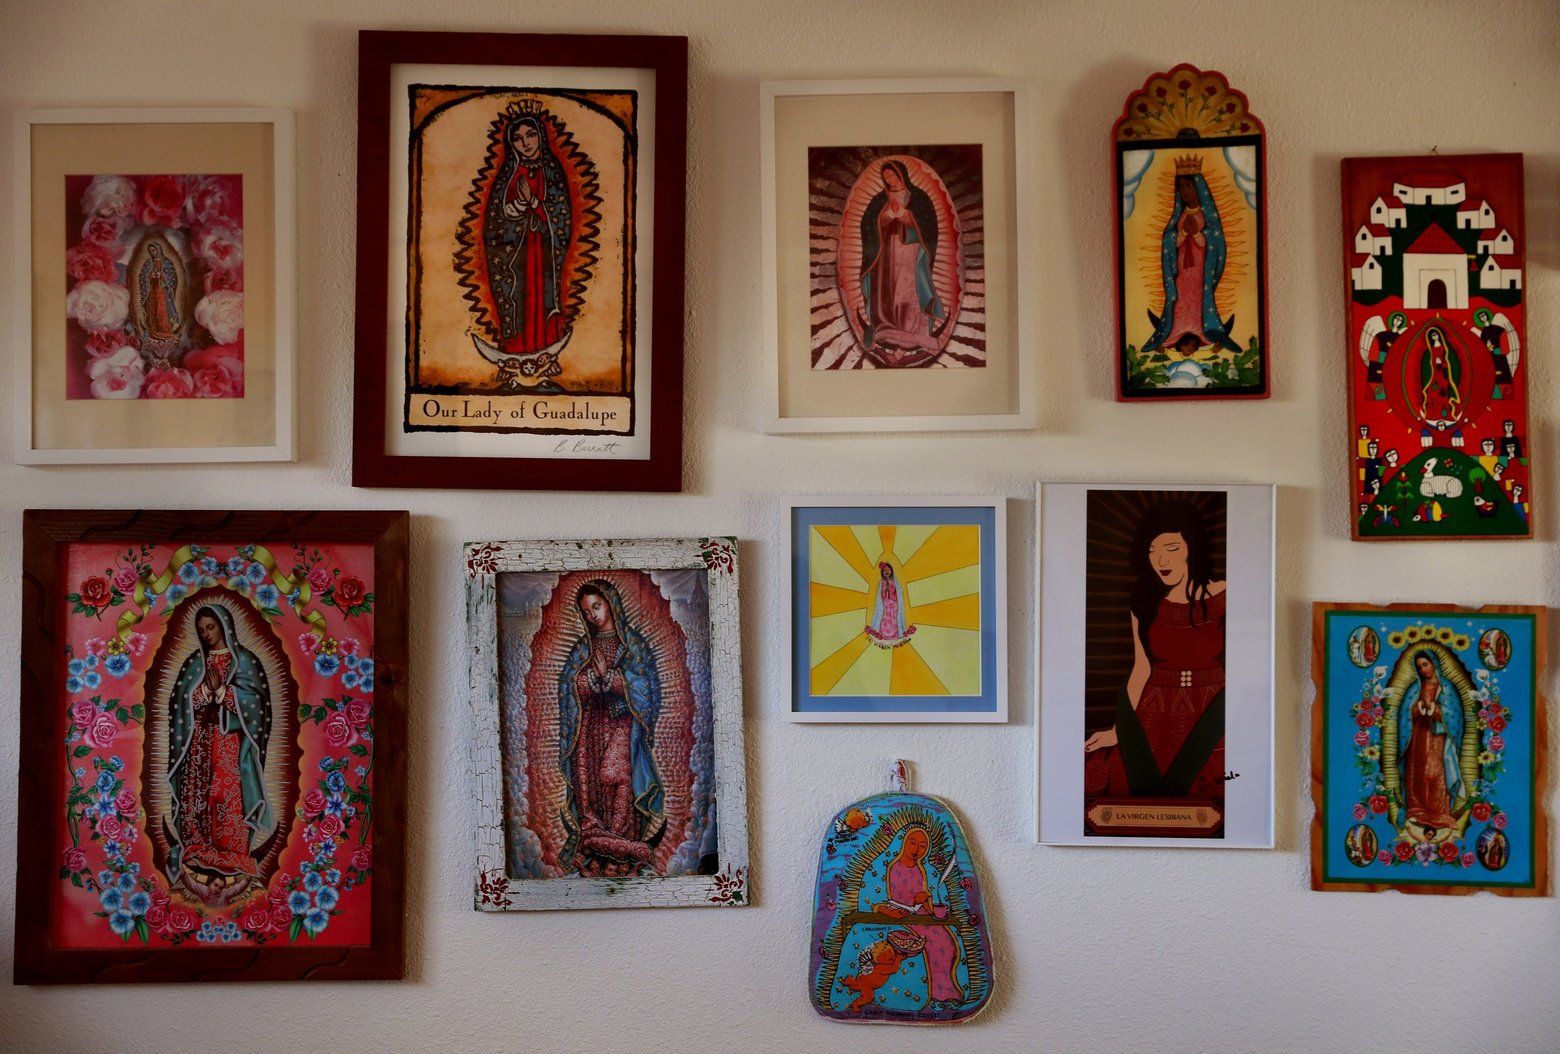  2 of 3 | Claudia Castro Luna collects images of the Virgin of Guadalupe, which are displayed in her Seattle home. Her book “Killing Marías” is comprised of 44 poems, each honoring a woman who was killed in Ciudad Juárez. The book was written with the Virgin of Guadalupe in mind. “In order for the book to do what I wanted to do, which was to give dignity, and honor the women … it was important to dwell in the realm of spirit and beauty,” she says. “A constant return to natural spaces of beauty and love.” Image by Erika Schultz / The Seattle Times. United States, 2020.